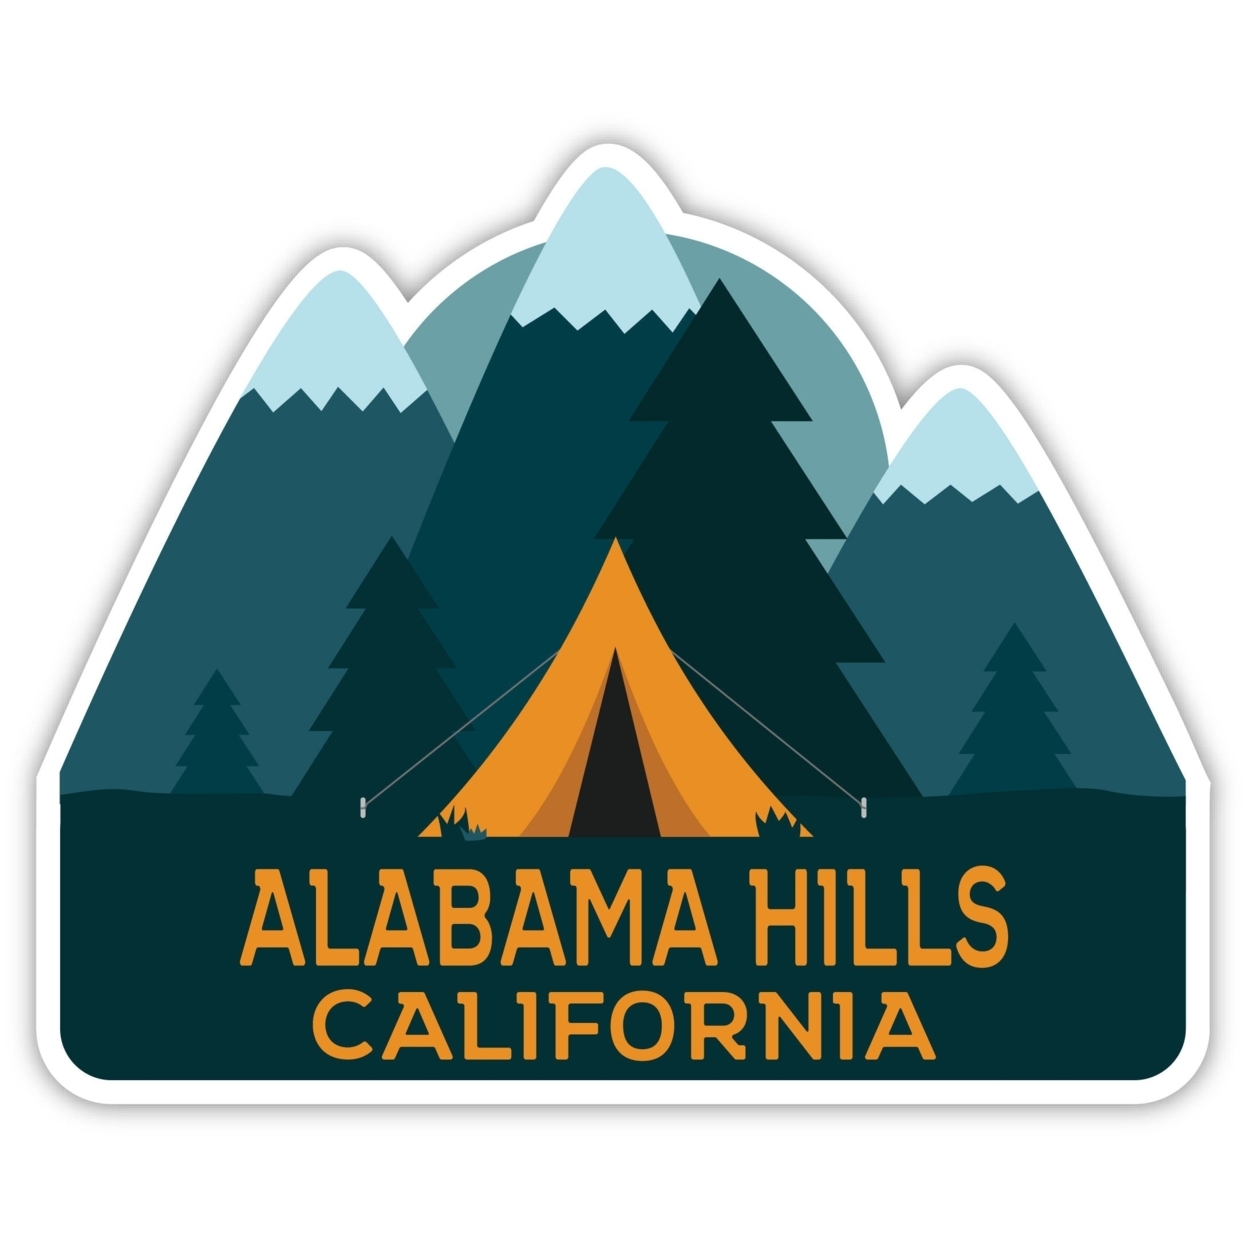 Alabama Hills California Souvenir Decorative Stickers (Choose Theme And Size) - 4-Pack, 10-Inch, Tent